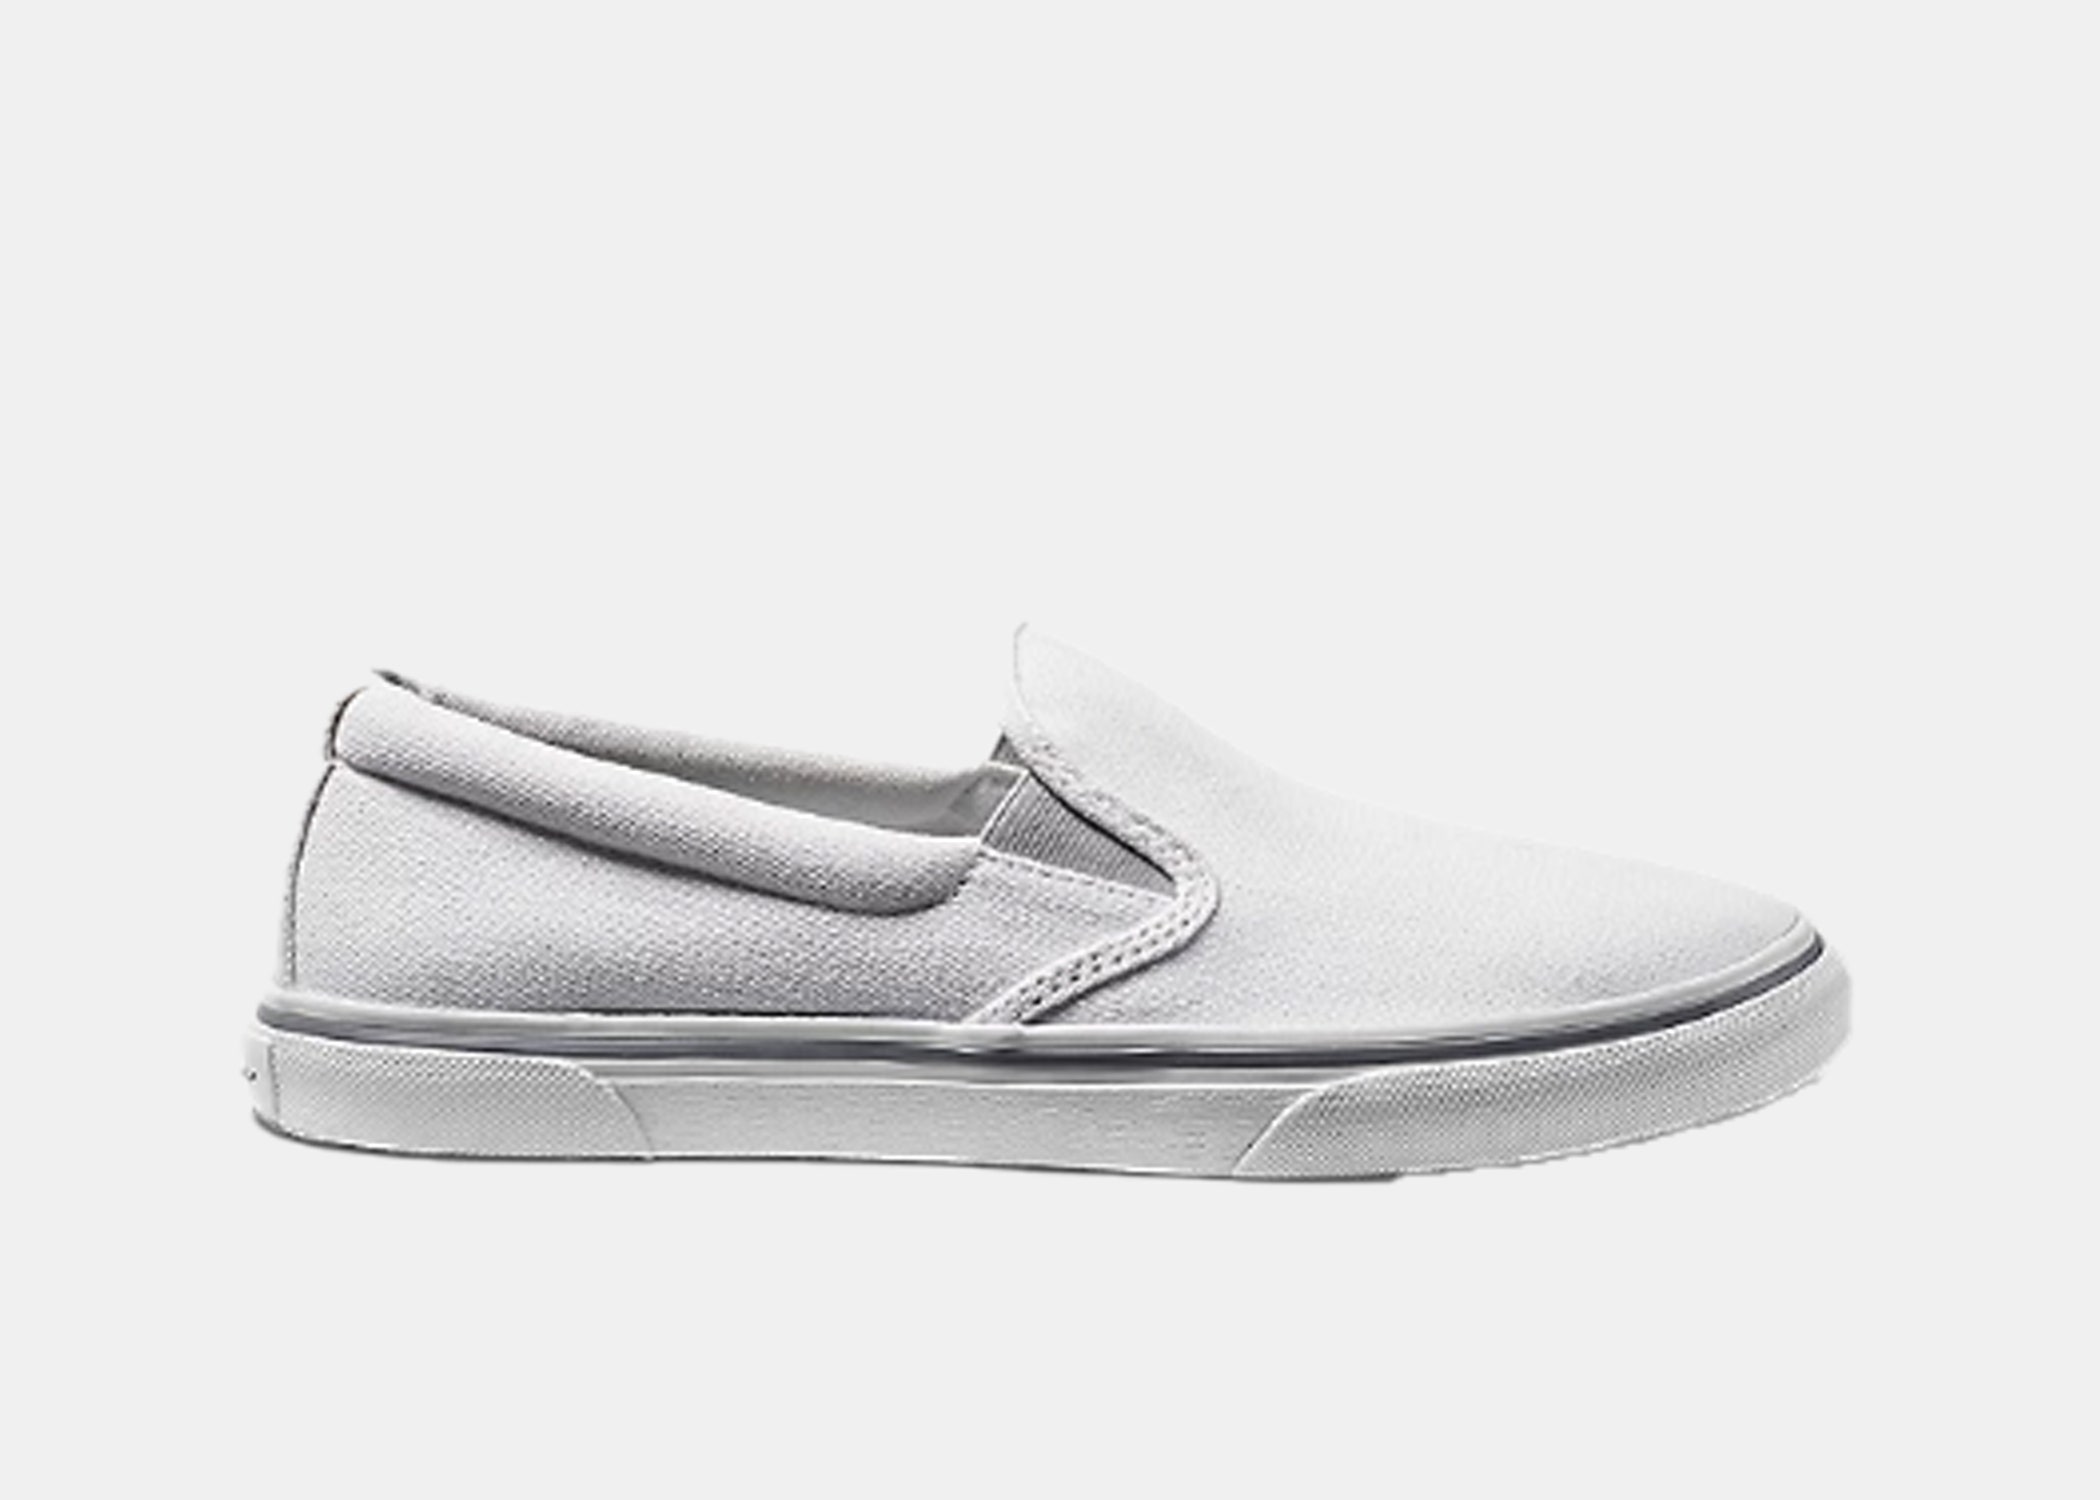 Packing a pair of <a href="https://www.cntraveler.com/story/best-white-sneakers?mbid=synd_msn_rss&utm_source=msn&utm_medium=syndication">white shoes</a> makes coordinating outfits a breeze, especially when they can stand up to hours of wear. Shoppers are buying multiples of the Haller Slip-on and have sworn by the casual, affordable shoe for years, noting its comfort, versatility, and longevity. $55, Amazon. <a href="https://www.amazon.com/Eddie-Bauer-Womens-Haller-Regular/dp/B07PQXK6PP/ref=sr_1_1">Get it now!</a><p>Sign up to receive the latest news, expert tips, and inspiration on all things travel</p><a href="https://www.cntraveler.com/newsletter/the-daily?sourceCode=msnsend">Inspire Me</a>